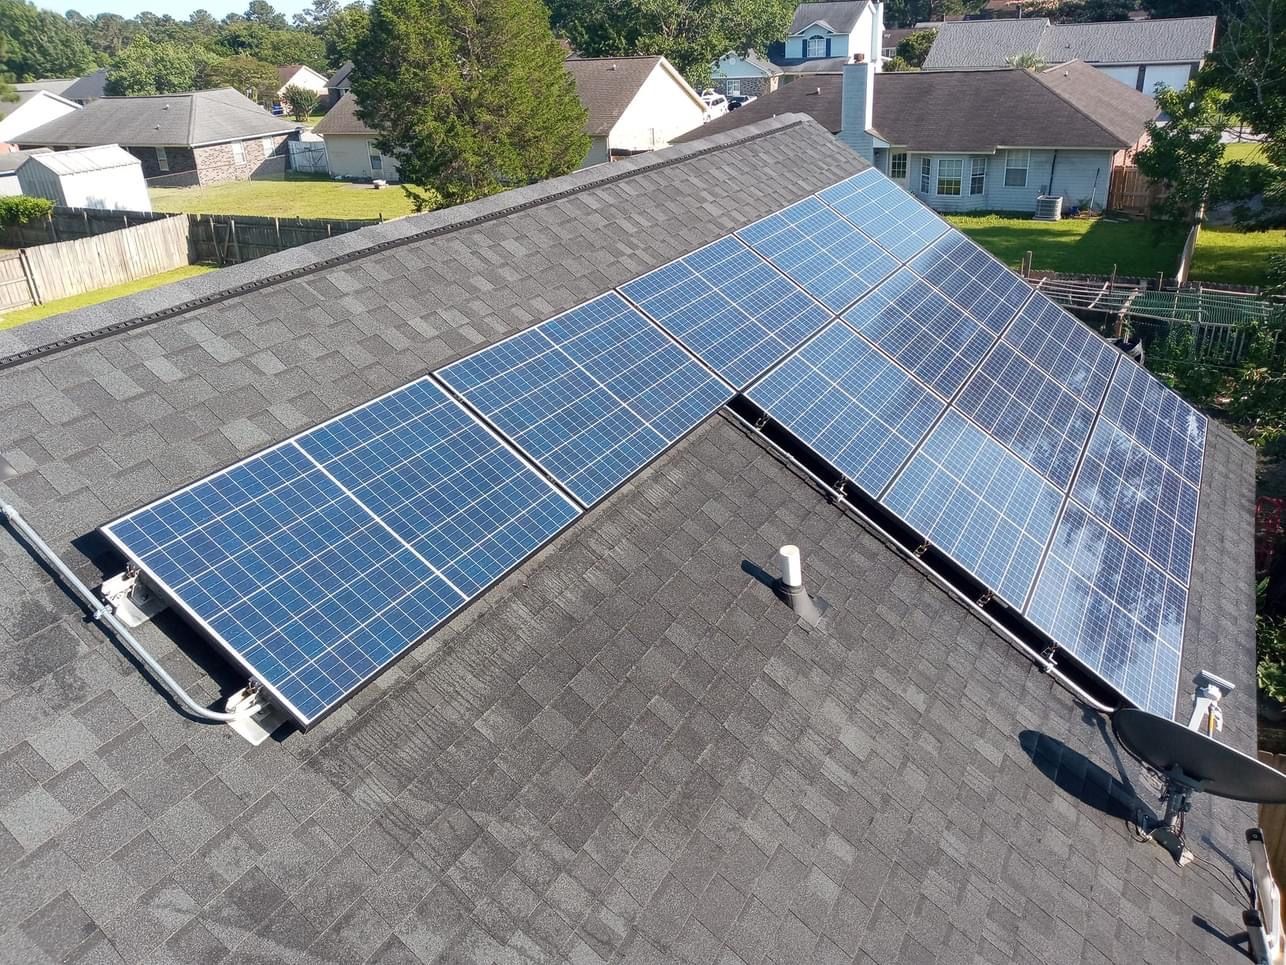 Solar panels in Santa Ana Hills, Orange County, shine brightly after our specialized cleaning service.